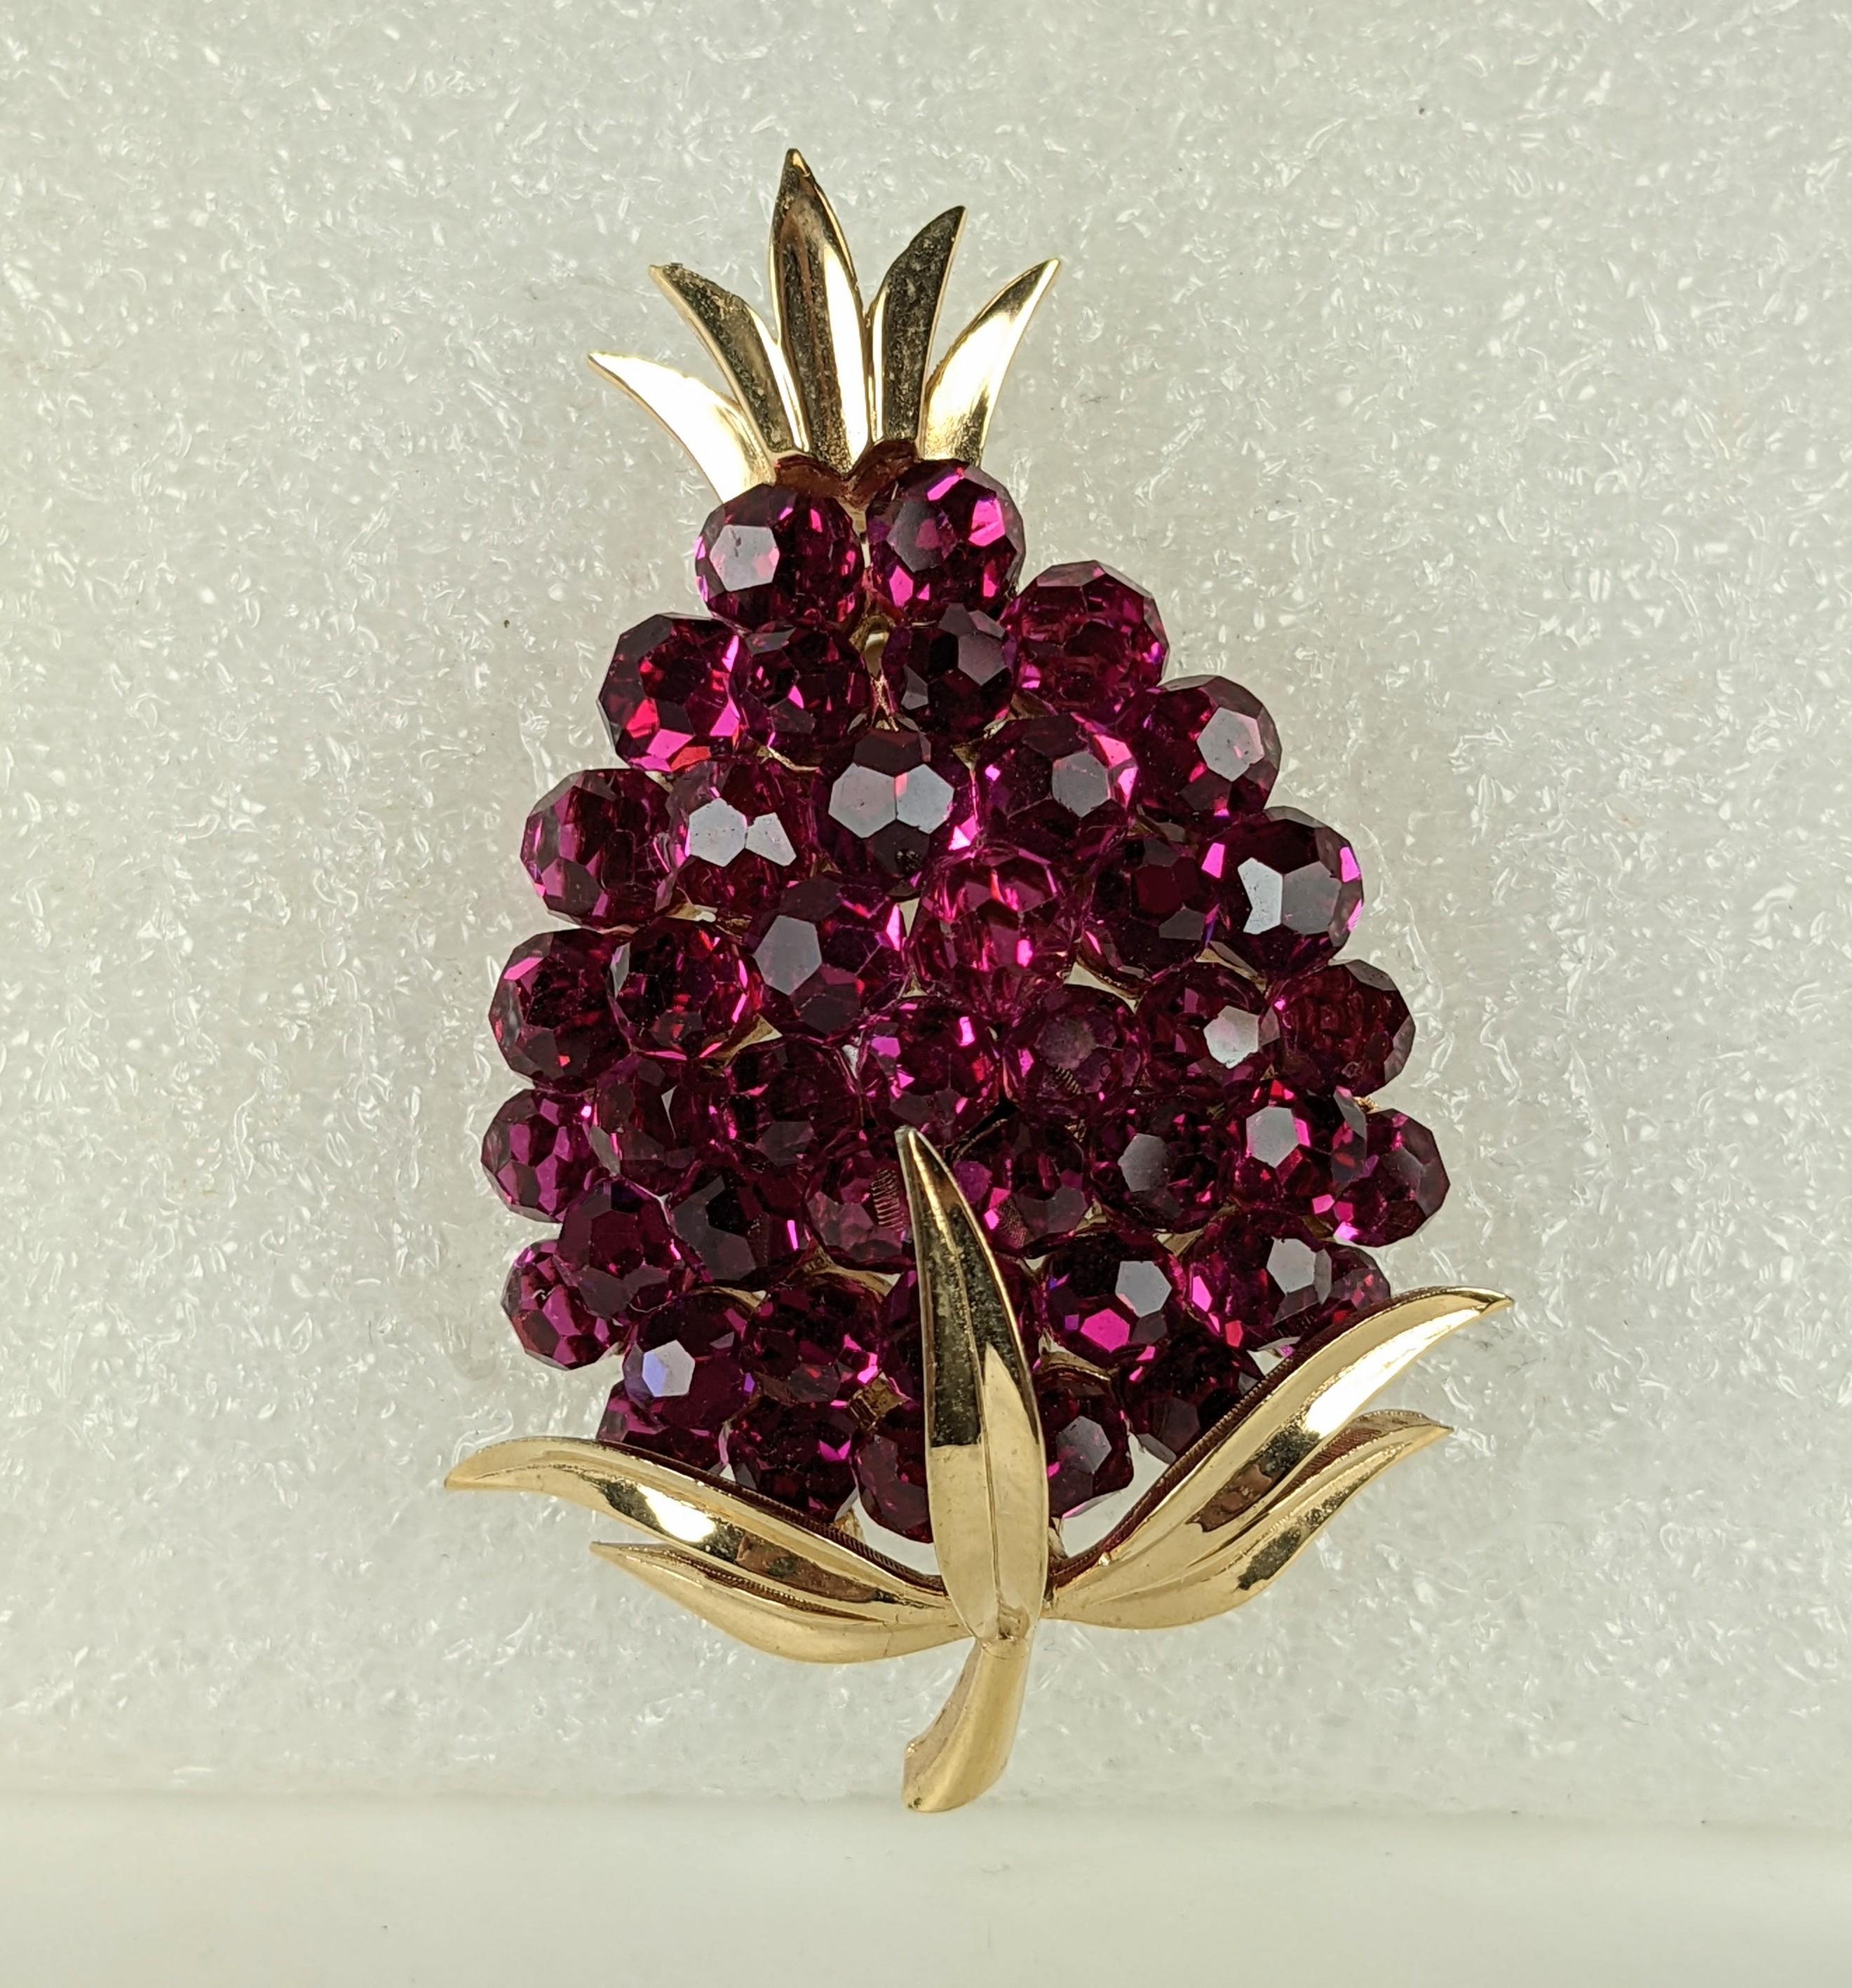 Trifari Swarovski Crystal Fuschia Pineapple Brooch from the 1960's. Dozens of faceted crystal globes are used as 